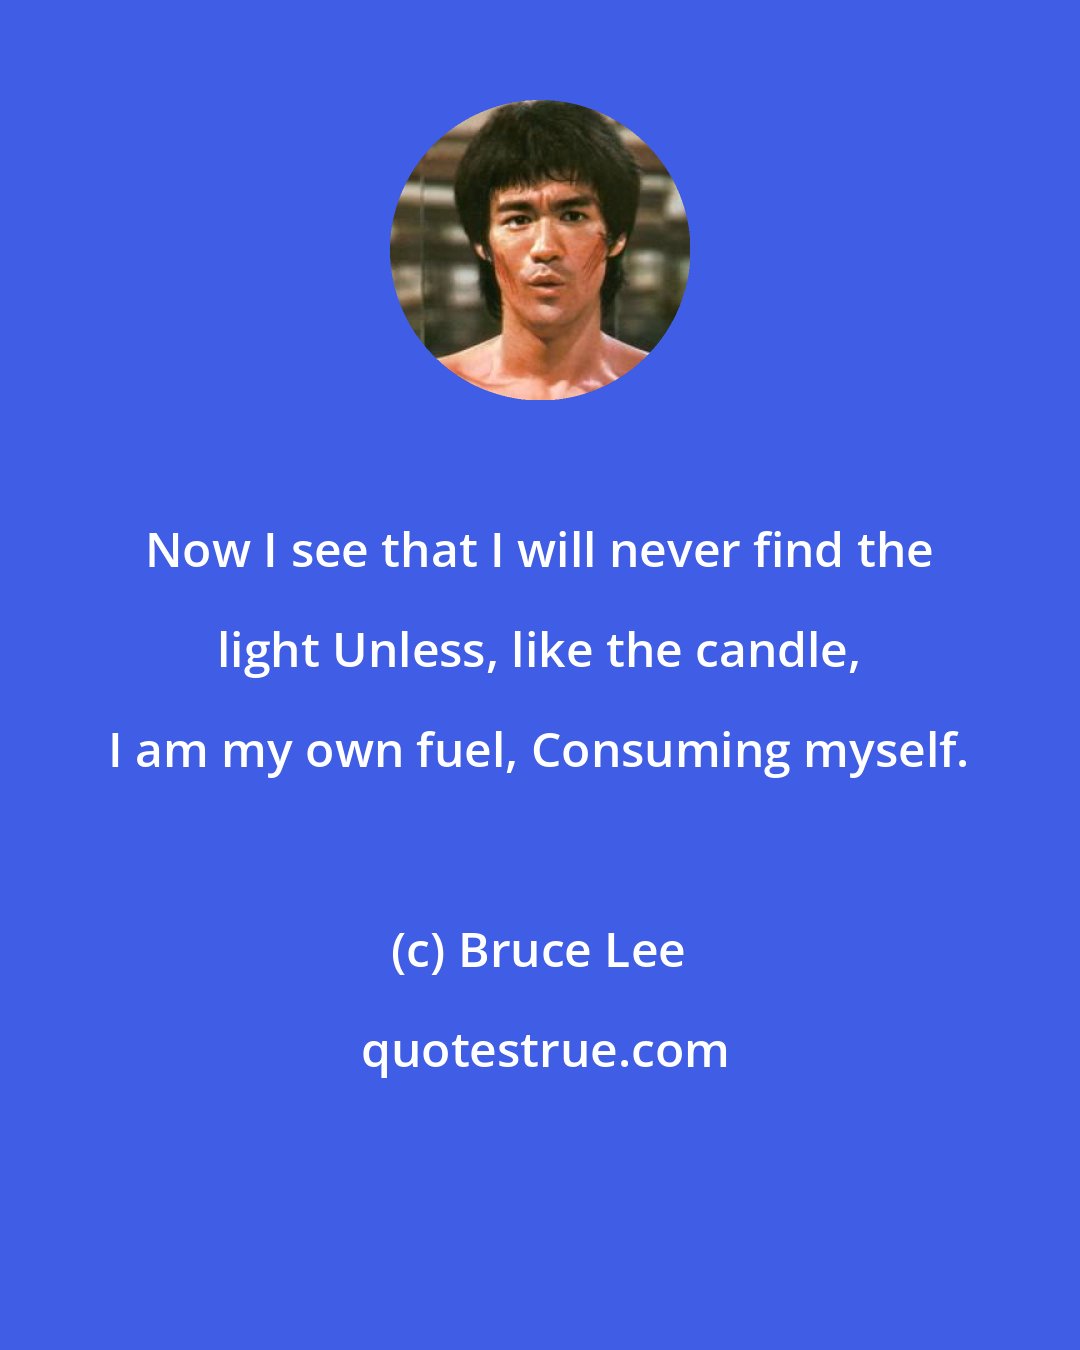 Bruce Lee: Now I see that I will never find the light Unless, like the candle, I am my own fuel, Consuming myself.